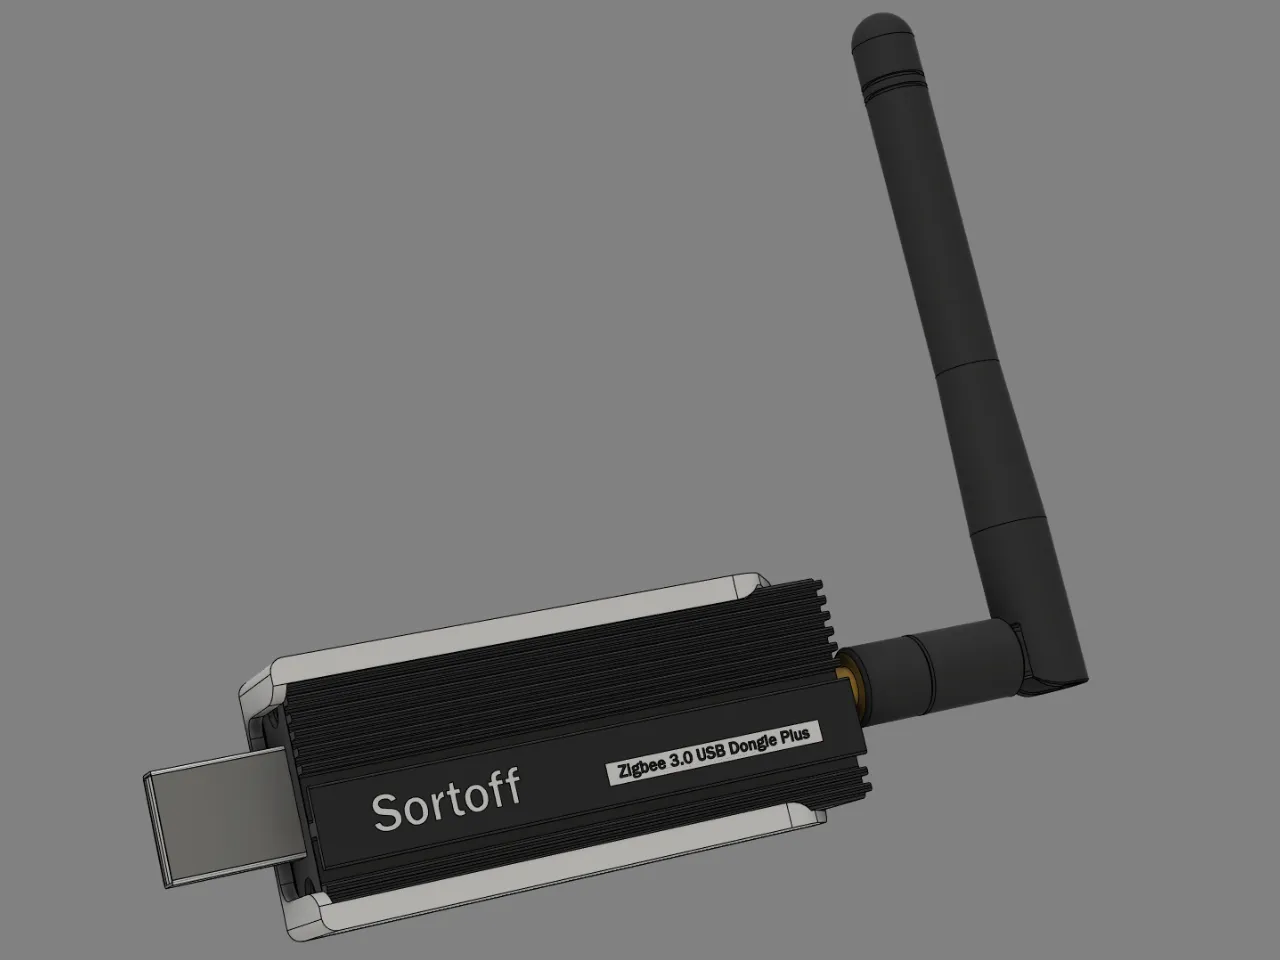 SONOFF Zigbee 3.0 USB Dongle Plus-P - SONOFF Official